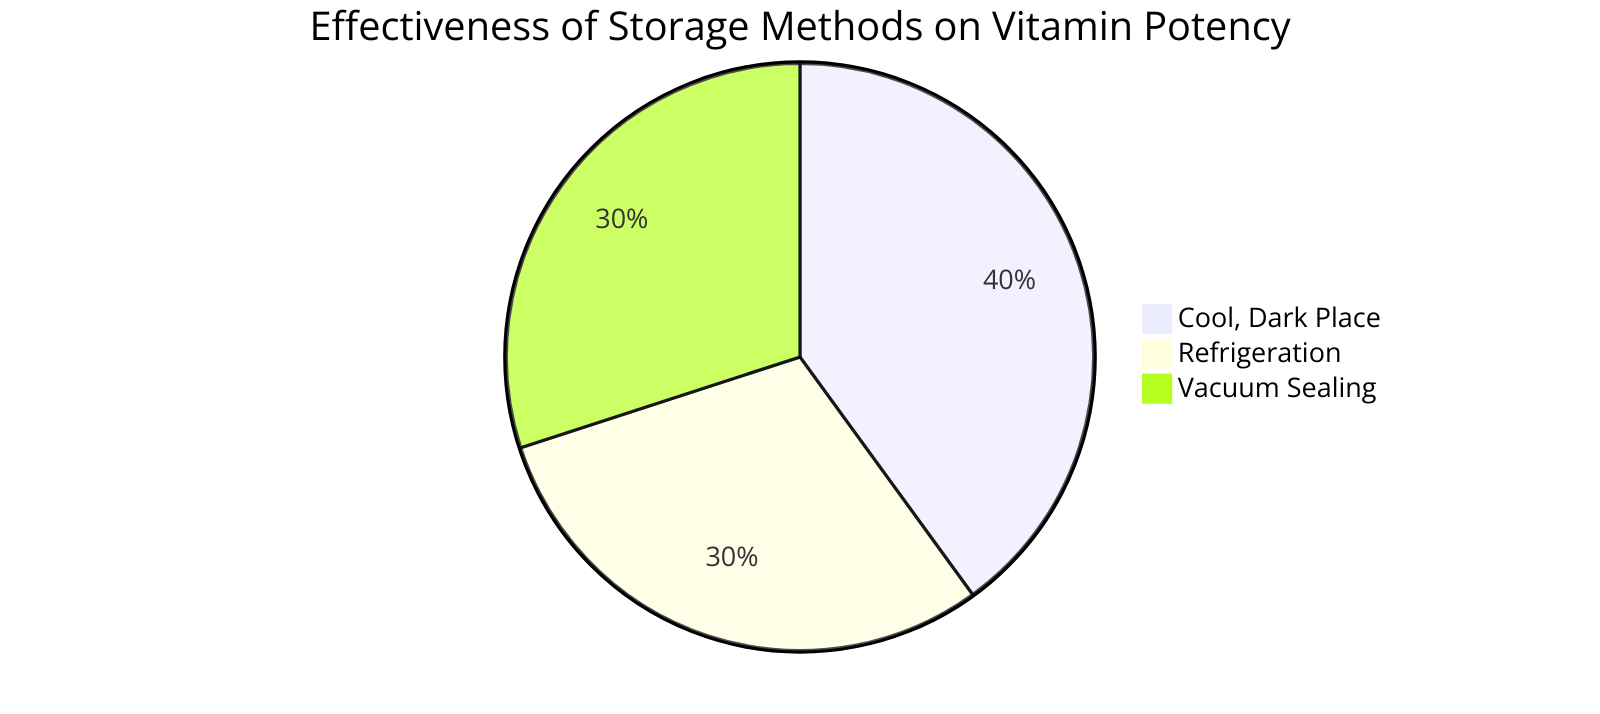 the effectiveness of different storage methods on preserving vitamin potency over time